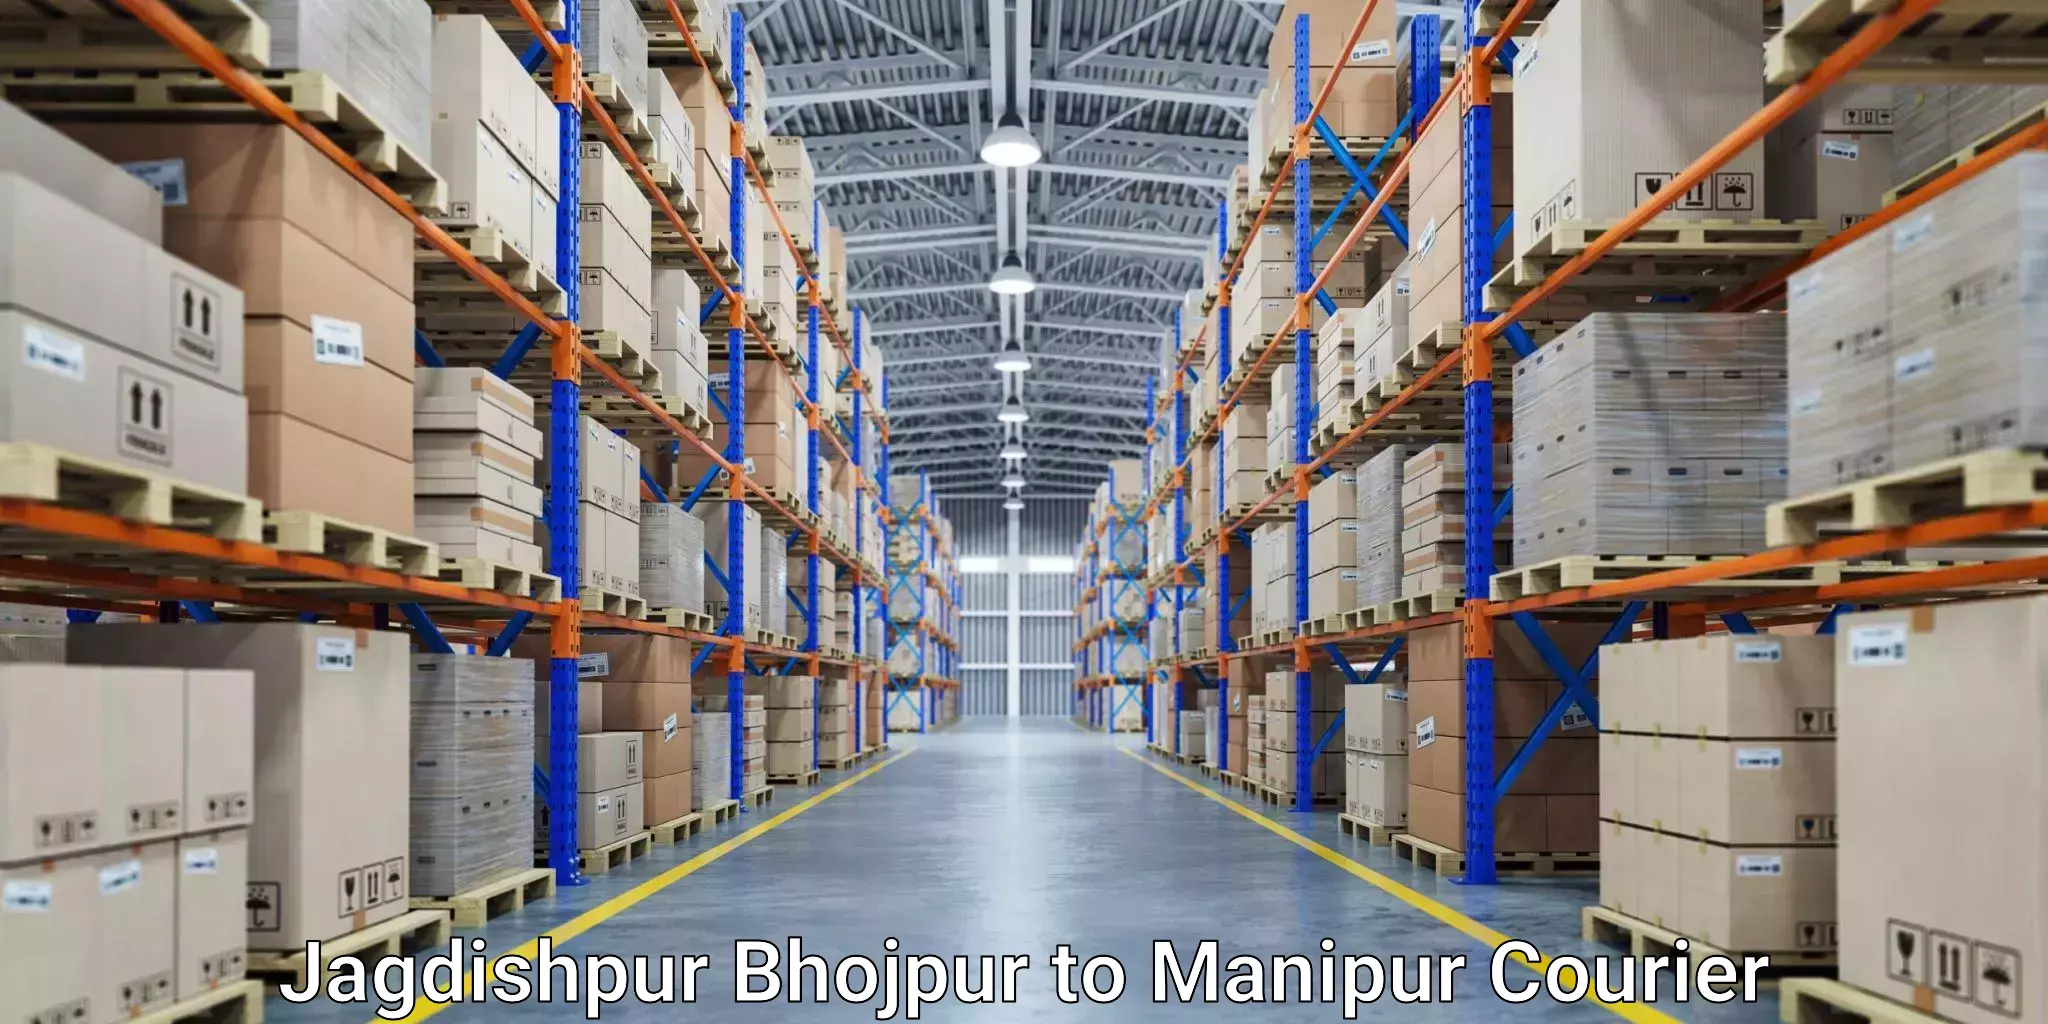 High-capacity courier solutions Jagdishpur Bhojpur to Chandel